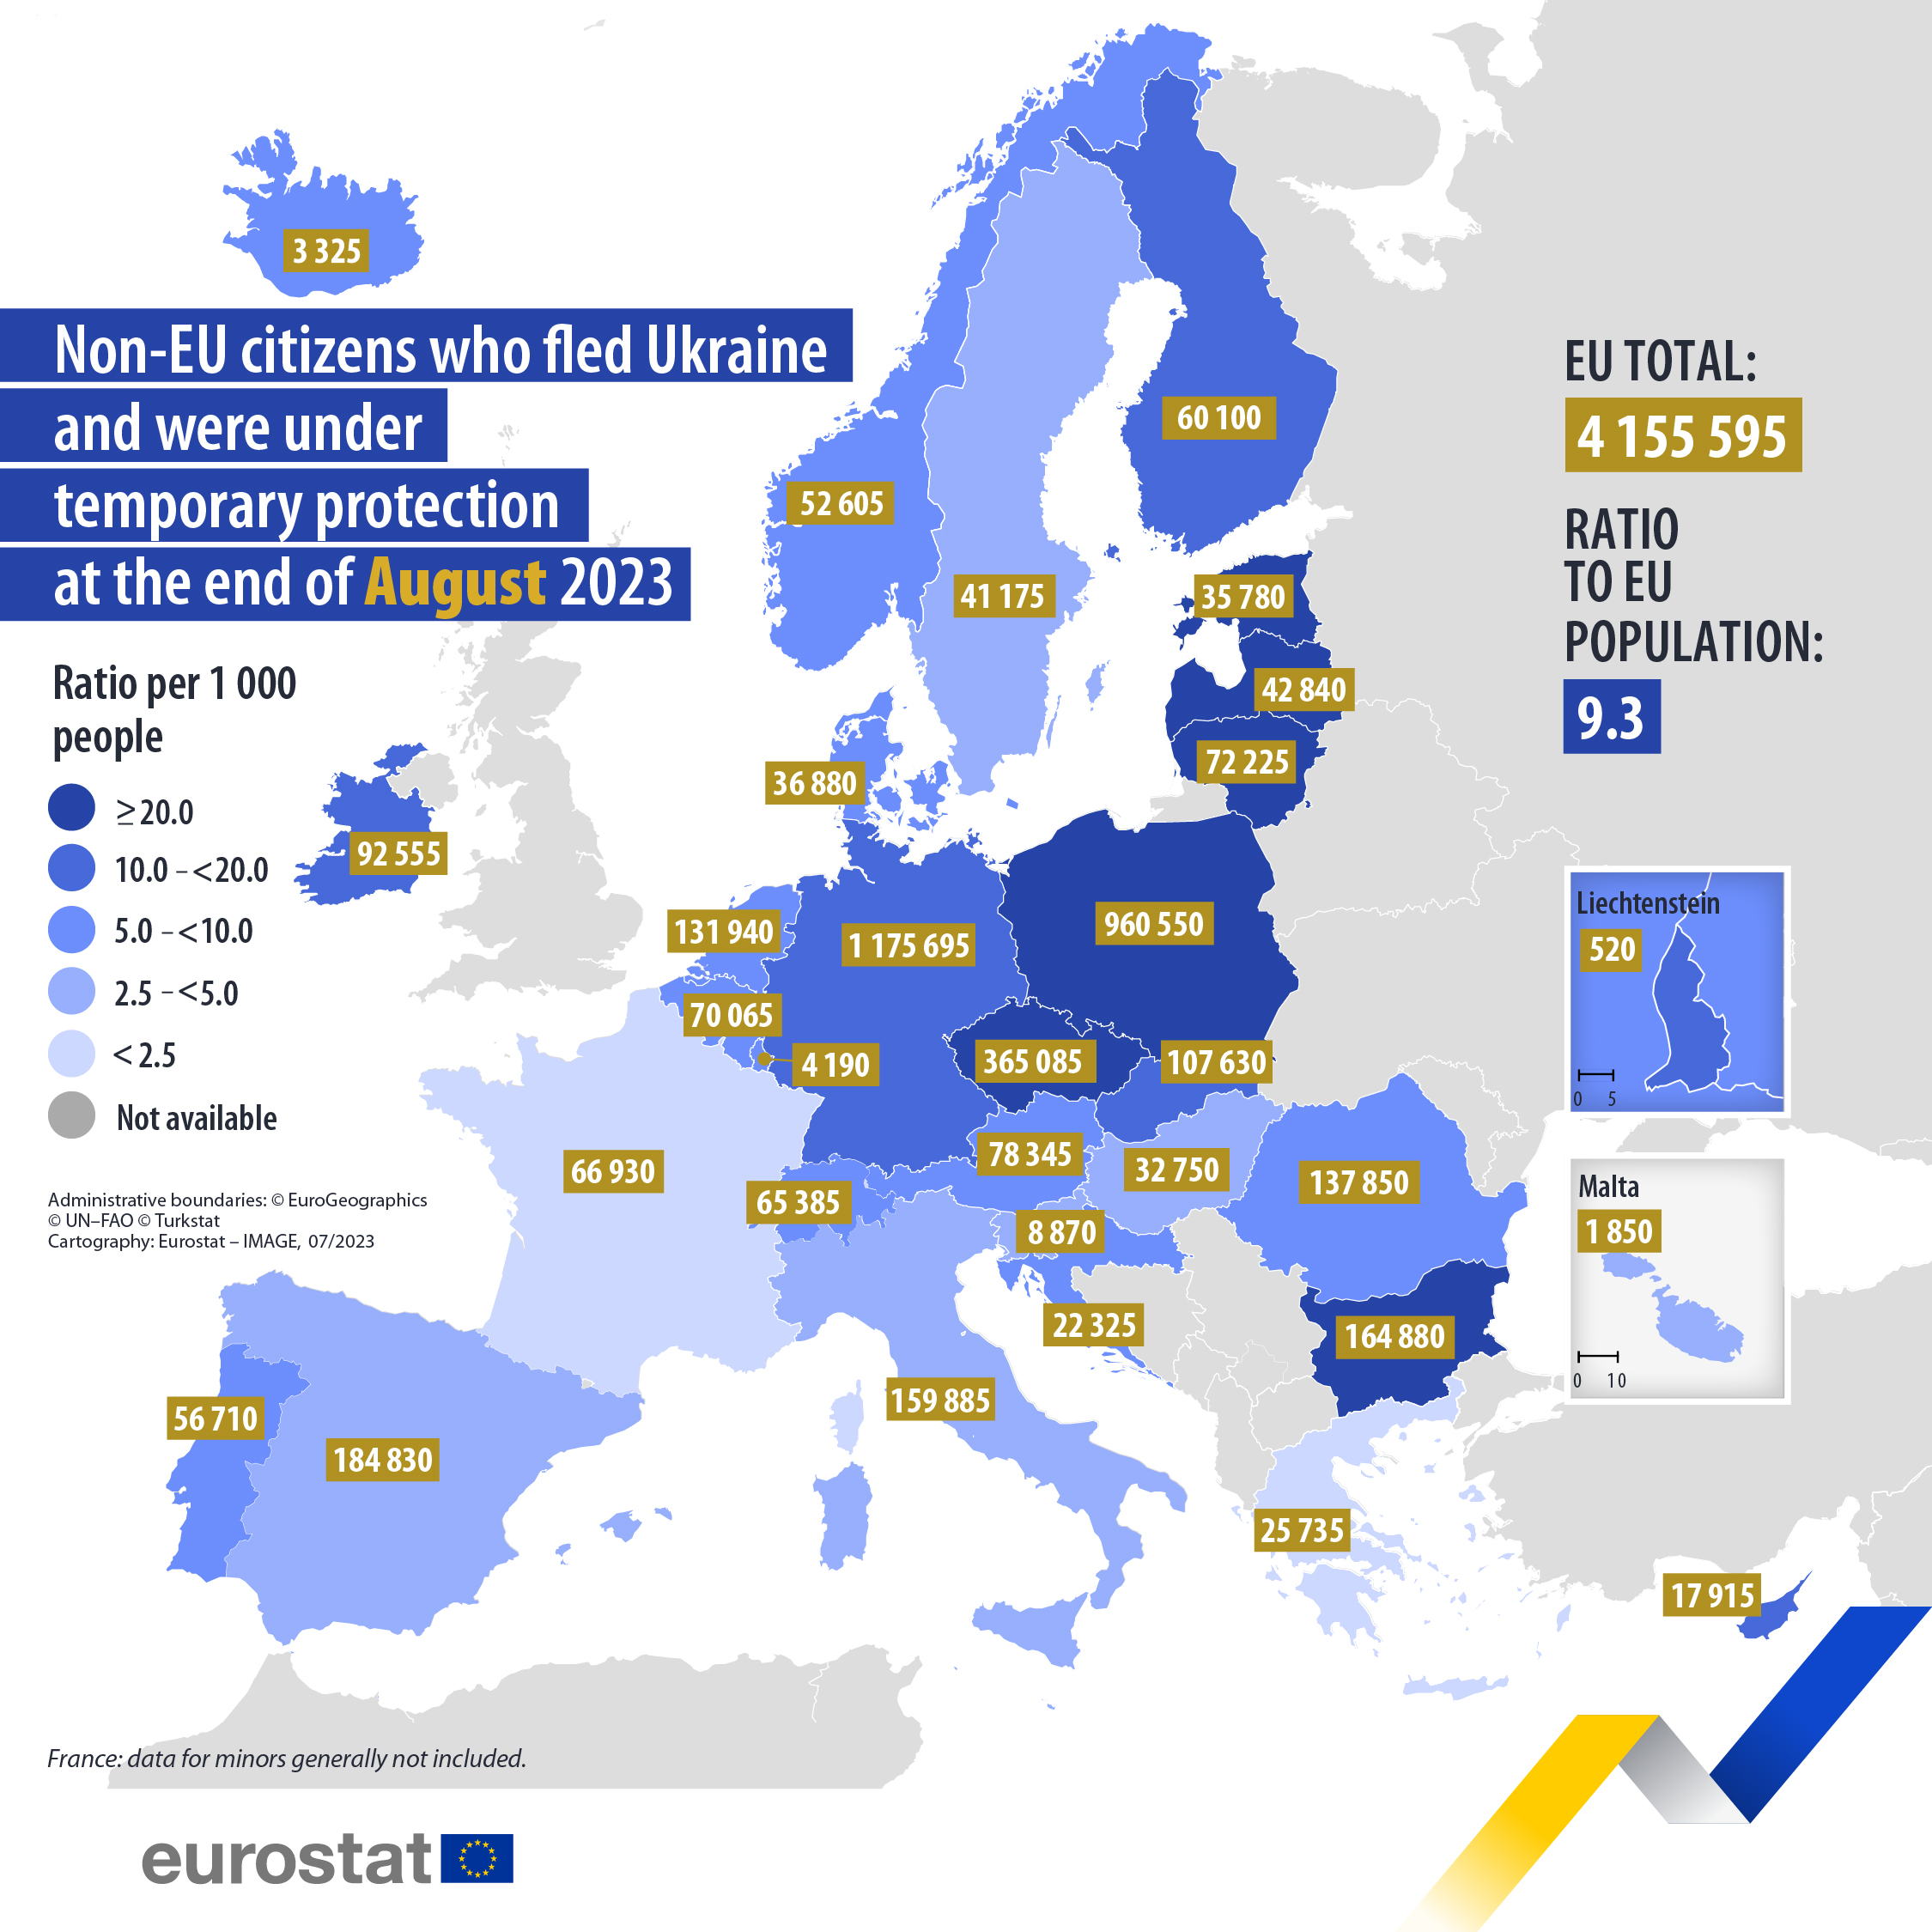 MAP: non-EU citizens who fleed Ukraine and were under temporary protection at the end of August 2023 (total numbers and Ratio to EU/country population)